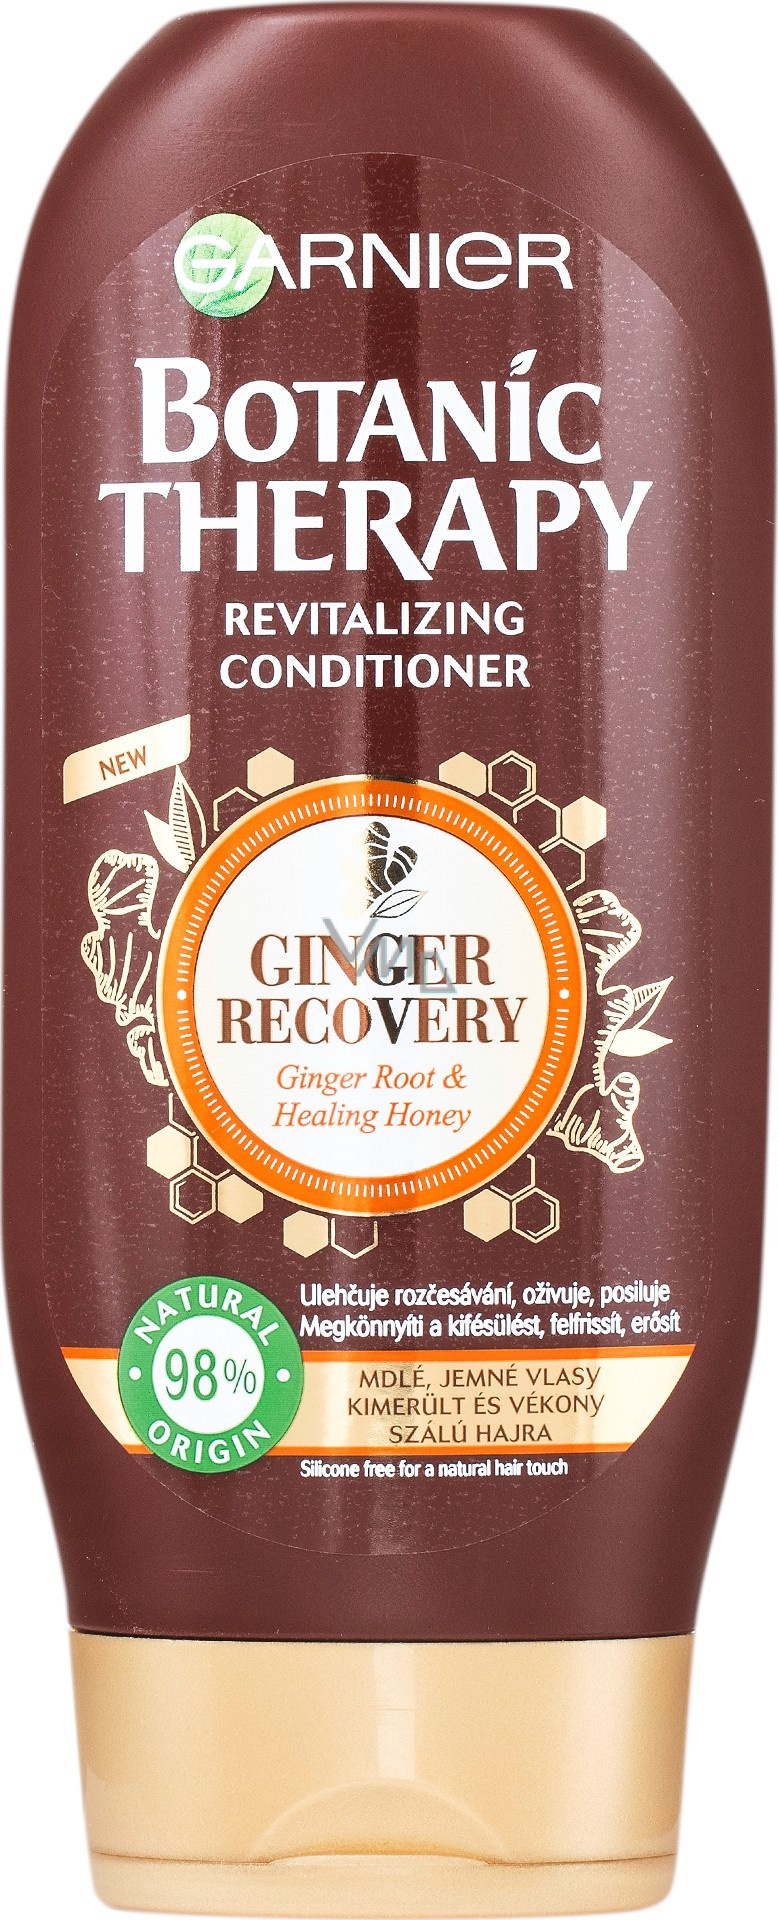 Garnier Ultra Doux Ginger Recovery Revitalizing Conditioner